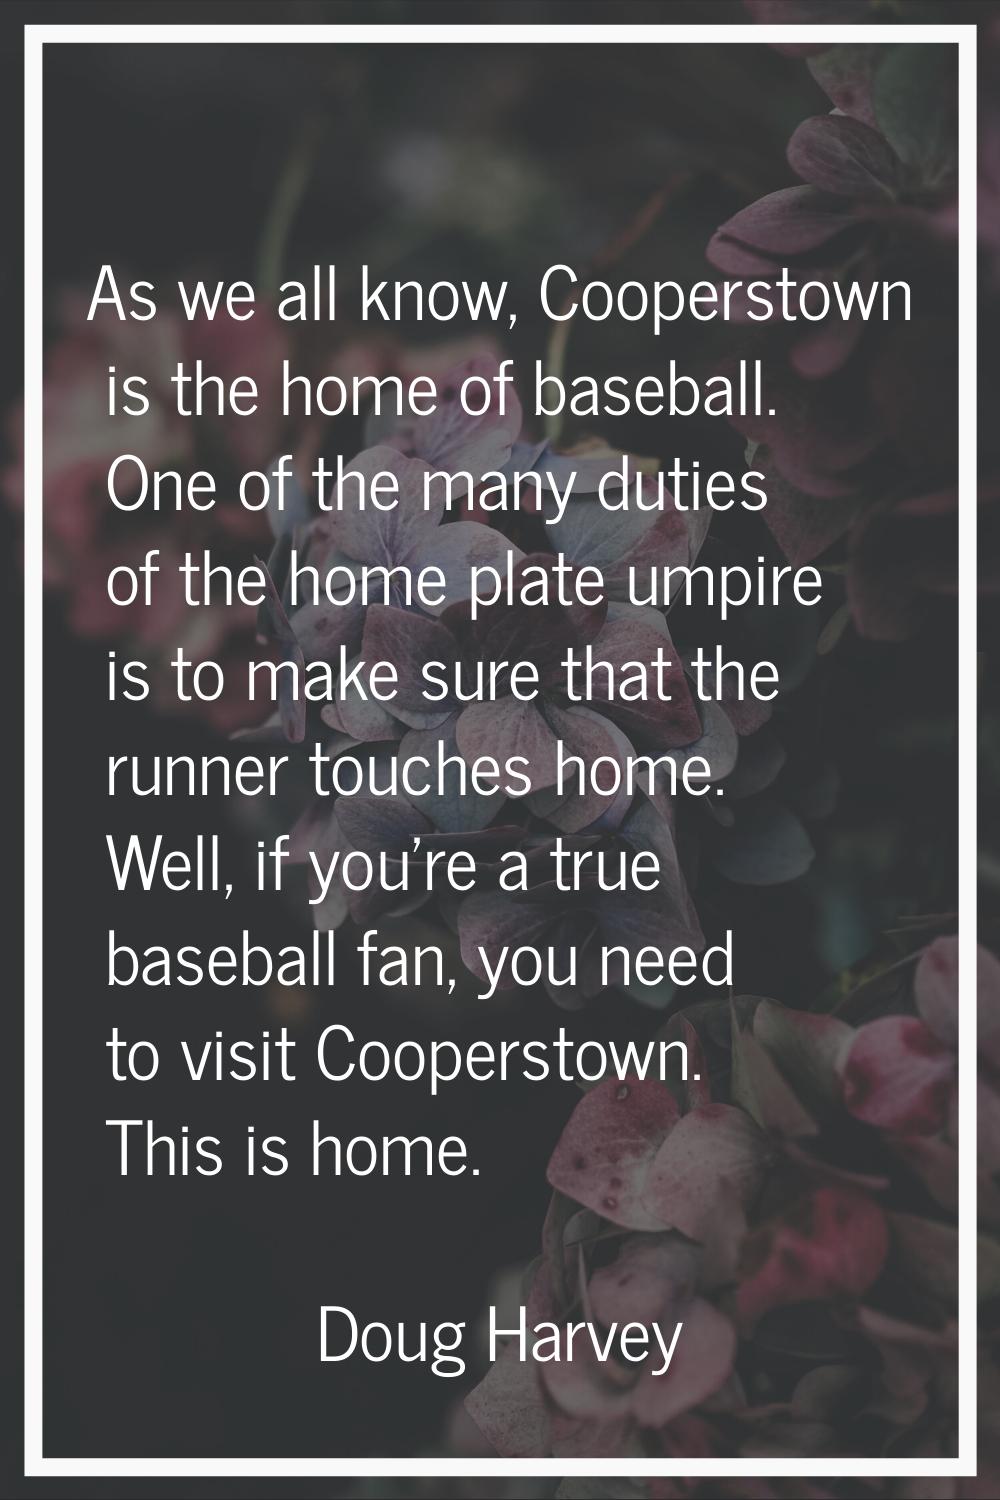 As we all know, Cooperstown is the home of baseball. One of the many duties of the home plate umpir